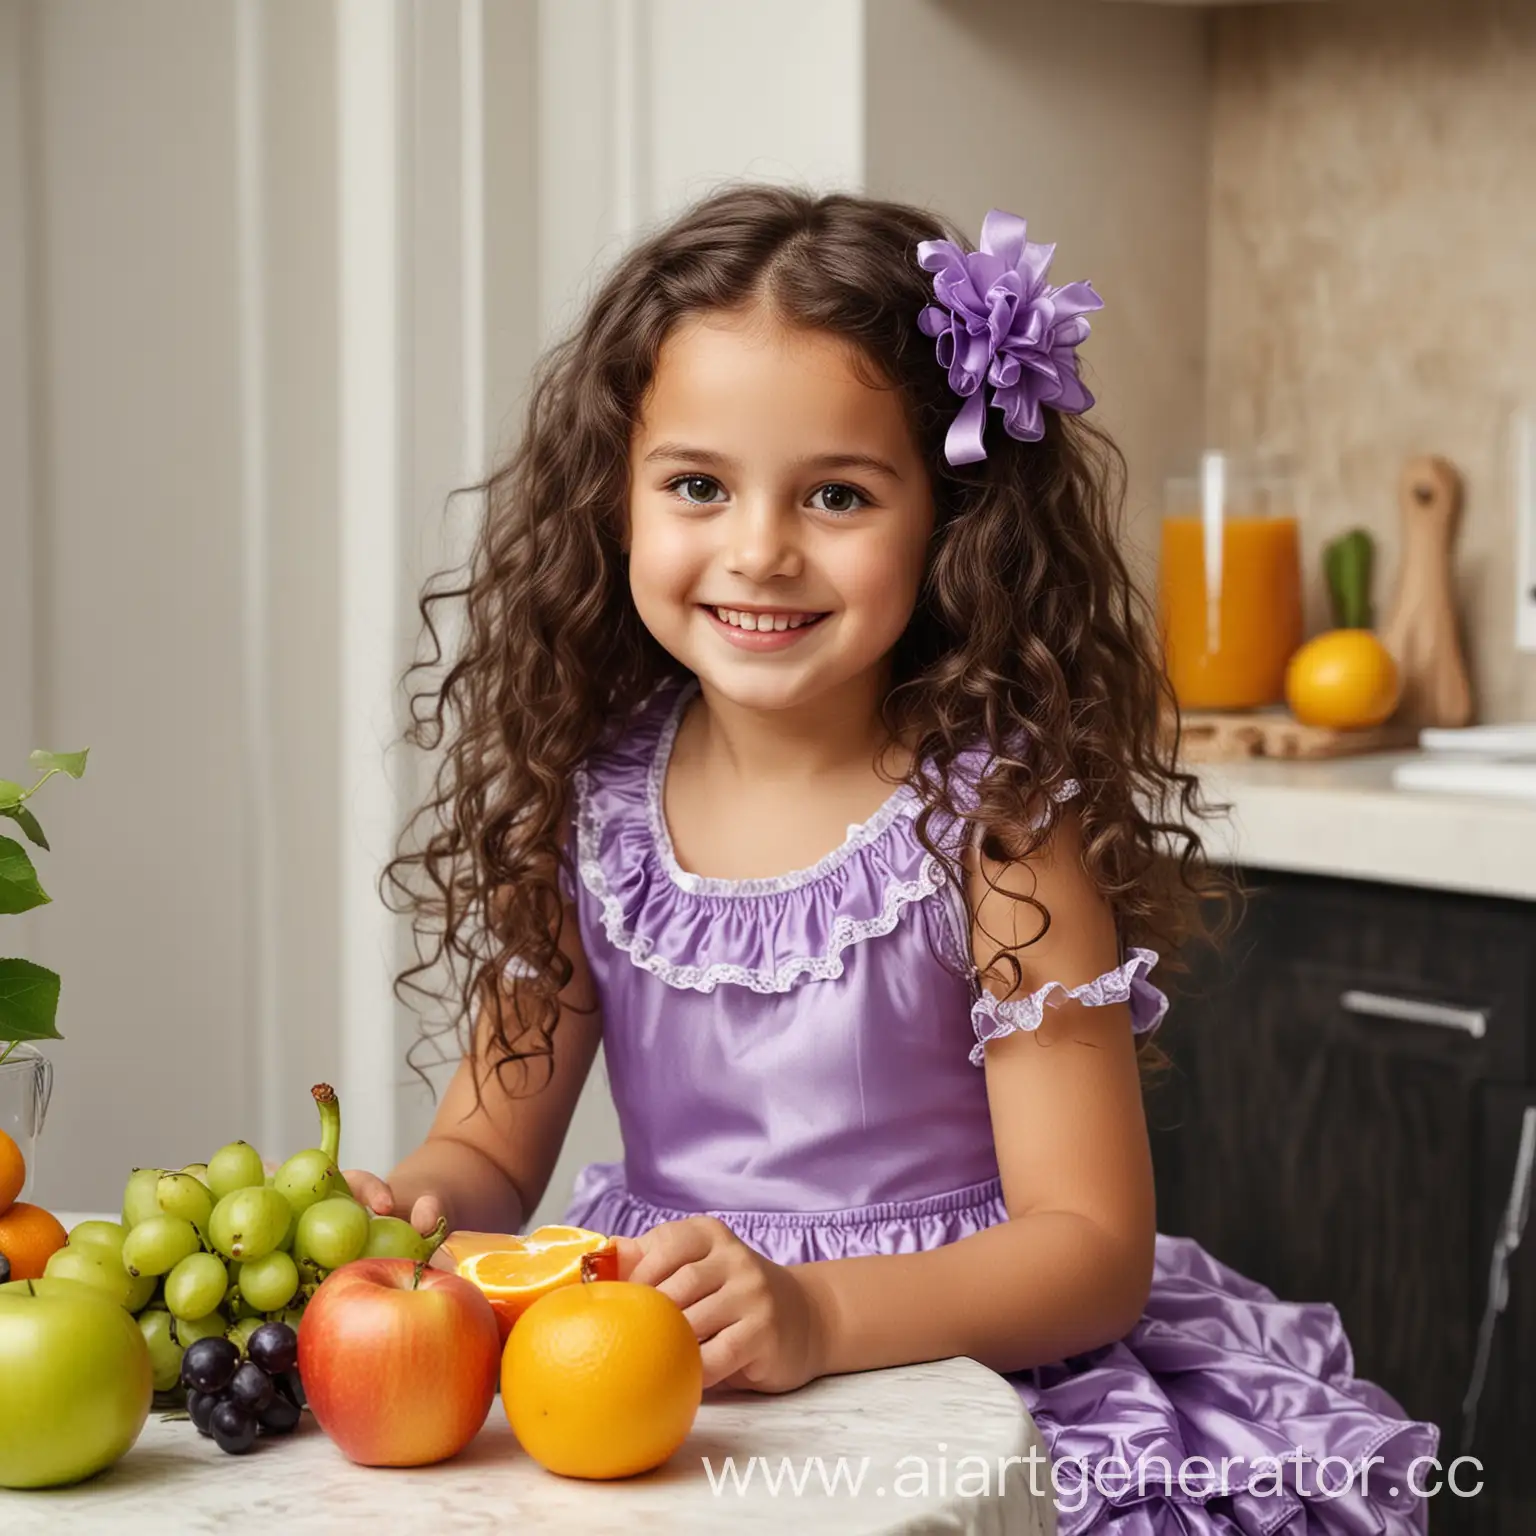 Girl-Enjoying-Fresh-Juice-with-Colorful-Fruits-at-Kitchen-Table